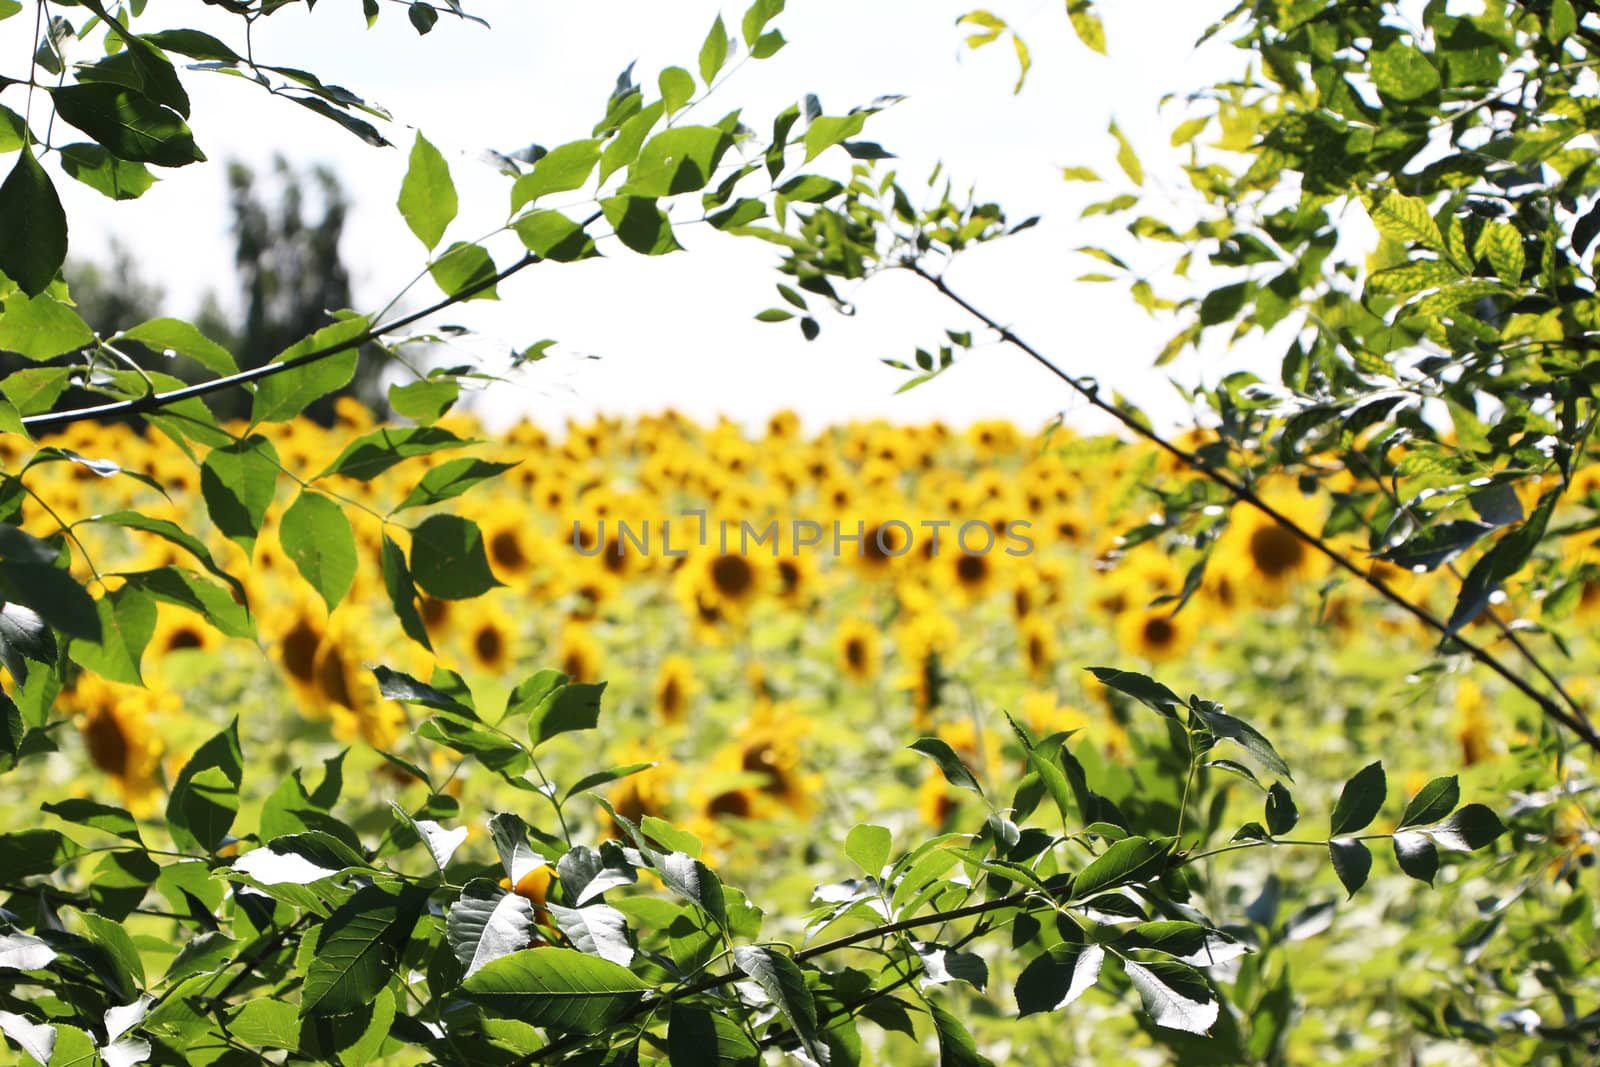 The blurry field of sunflowers through a frame of trees branches